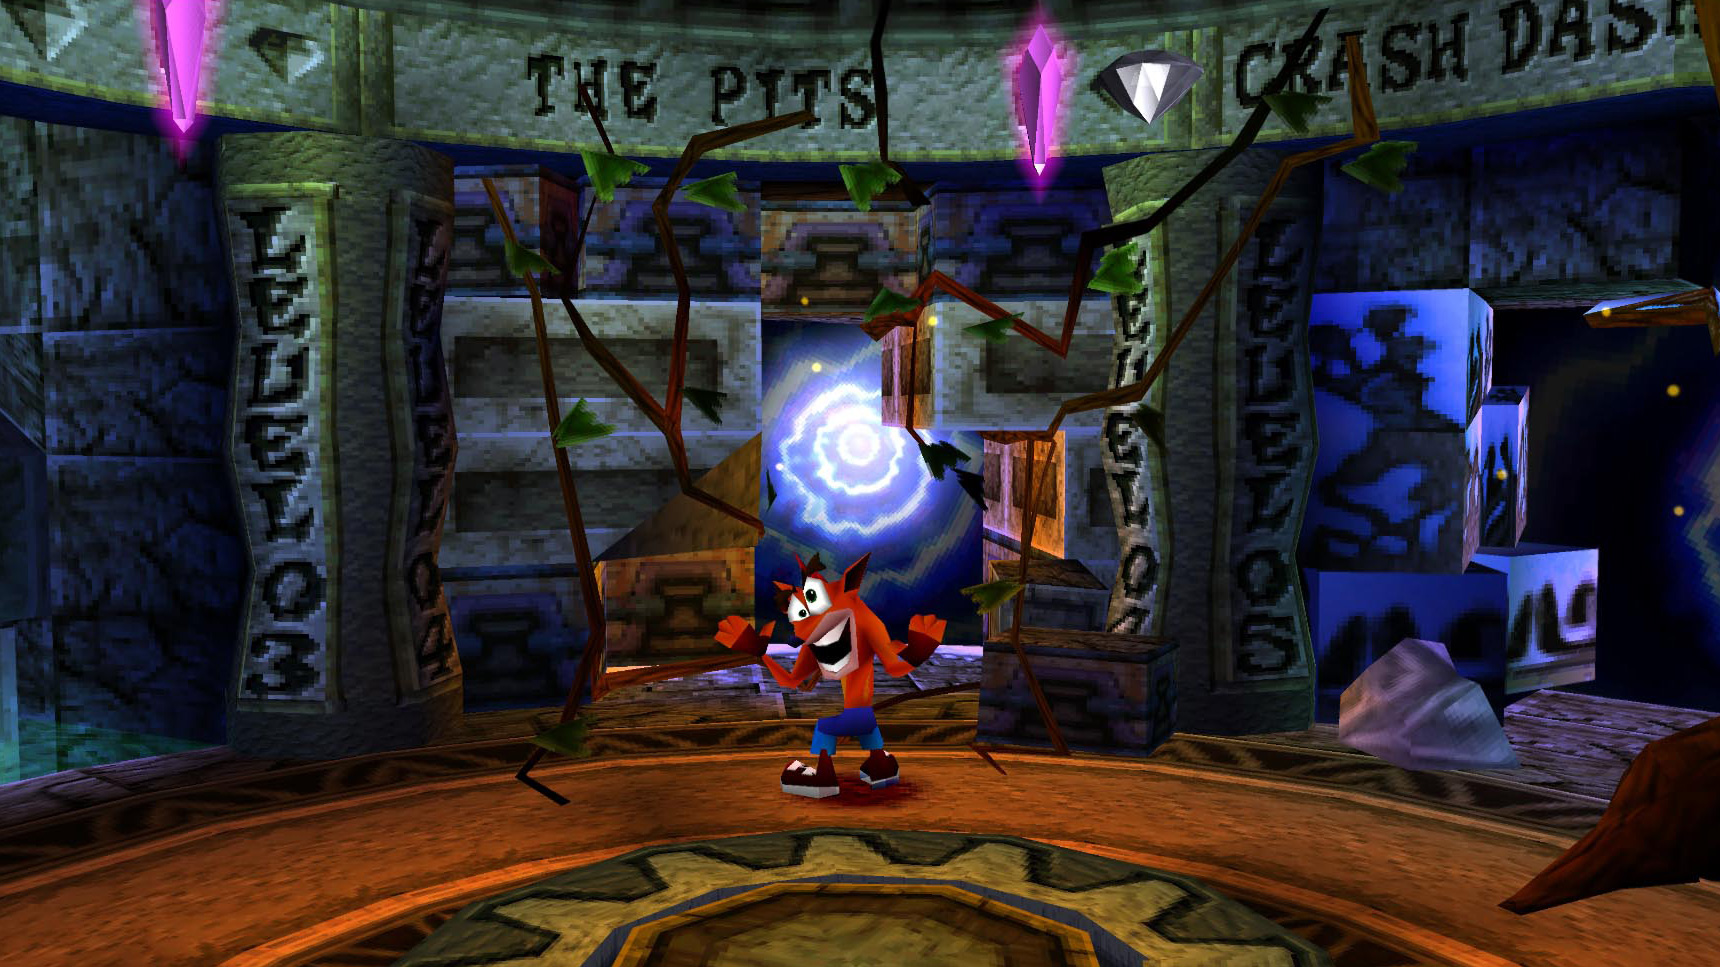 There are far more images available for Crash Bandicoot 2: Cortex Strikes B...